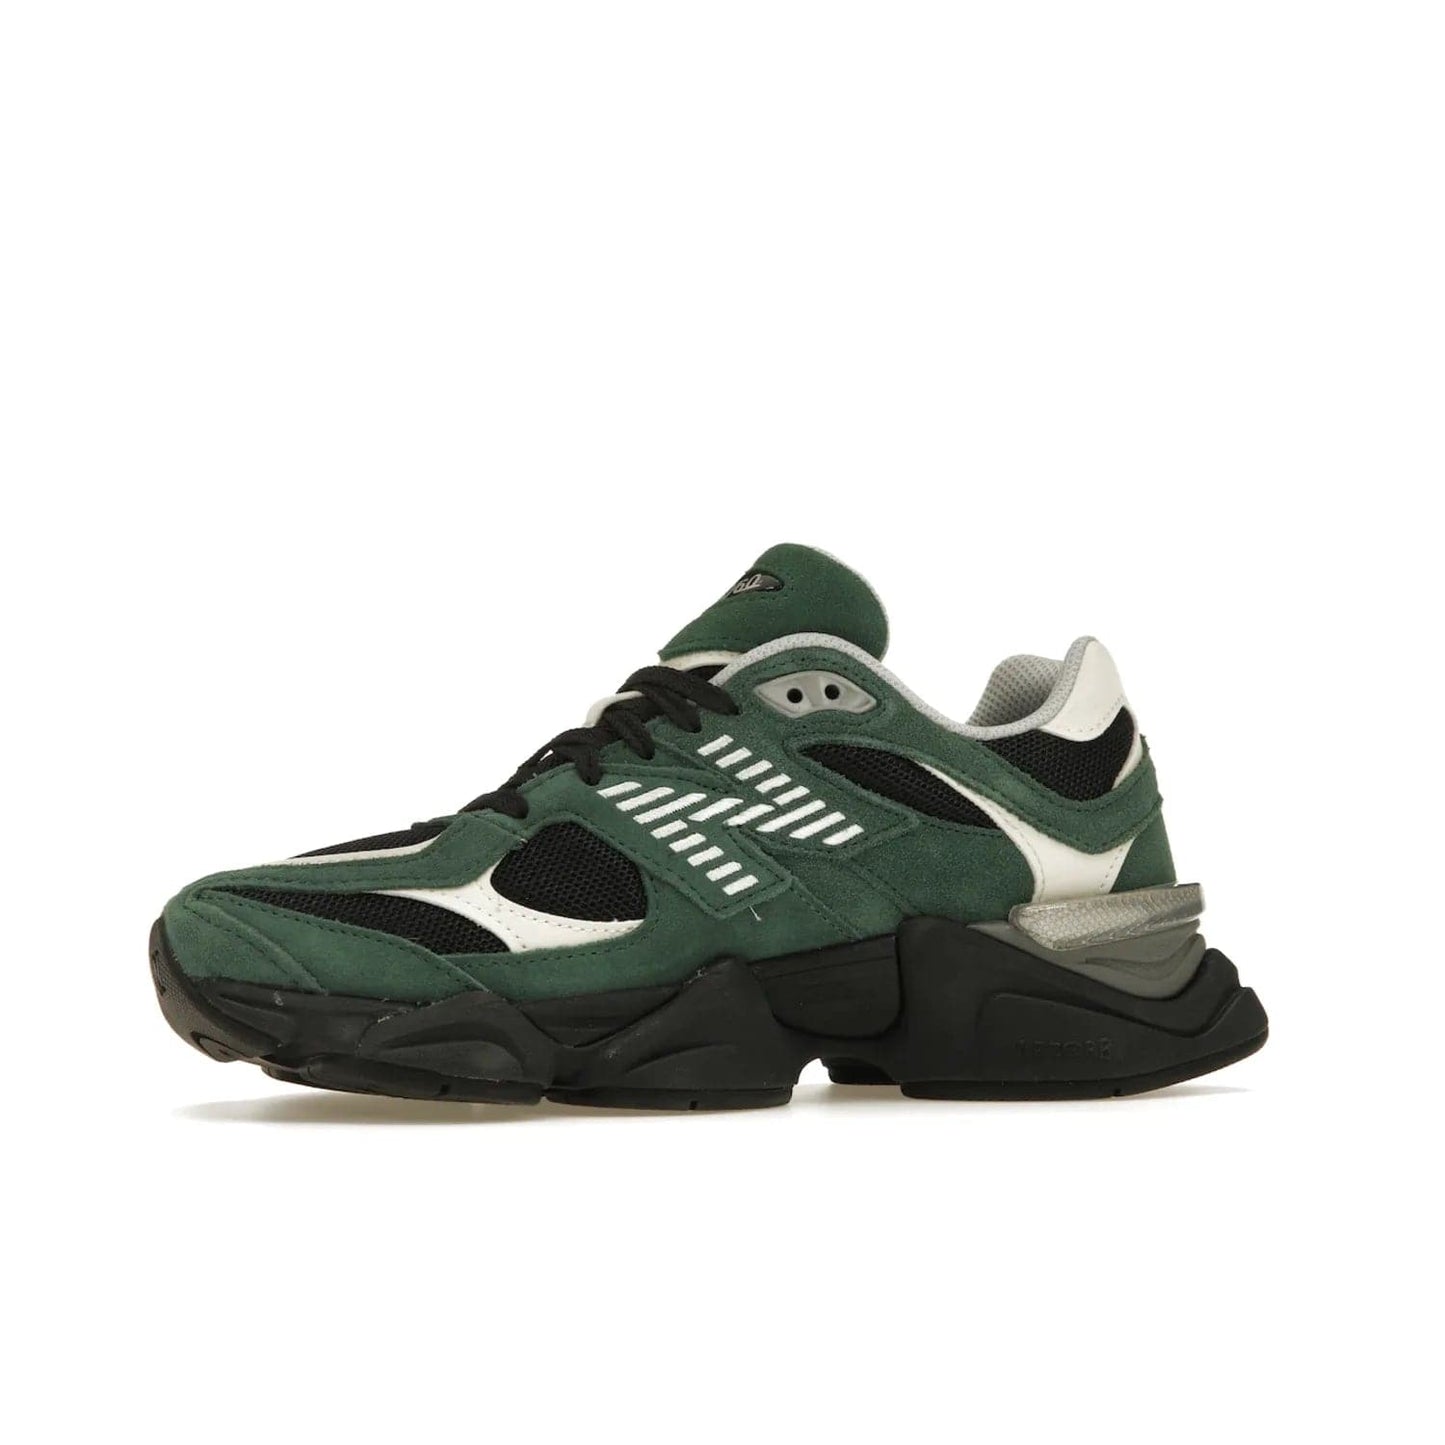 New Balance 9060 Team Forest Green - Image 17 - Only at www.BallersClubKickz.com - Introducing the New Balance 9060 Team Forest Green! Durable statement sneaker with a vibrant forest green upper and contrast detailing. Release date 2023-04-04 - don't miss out!